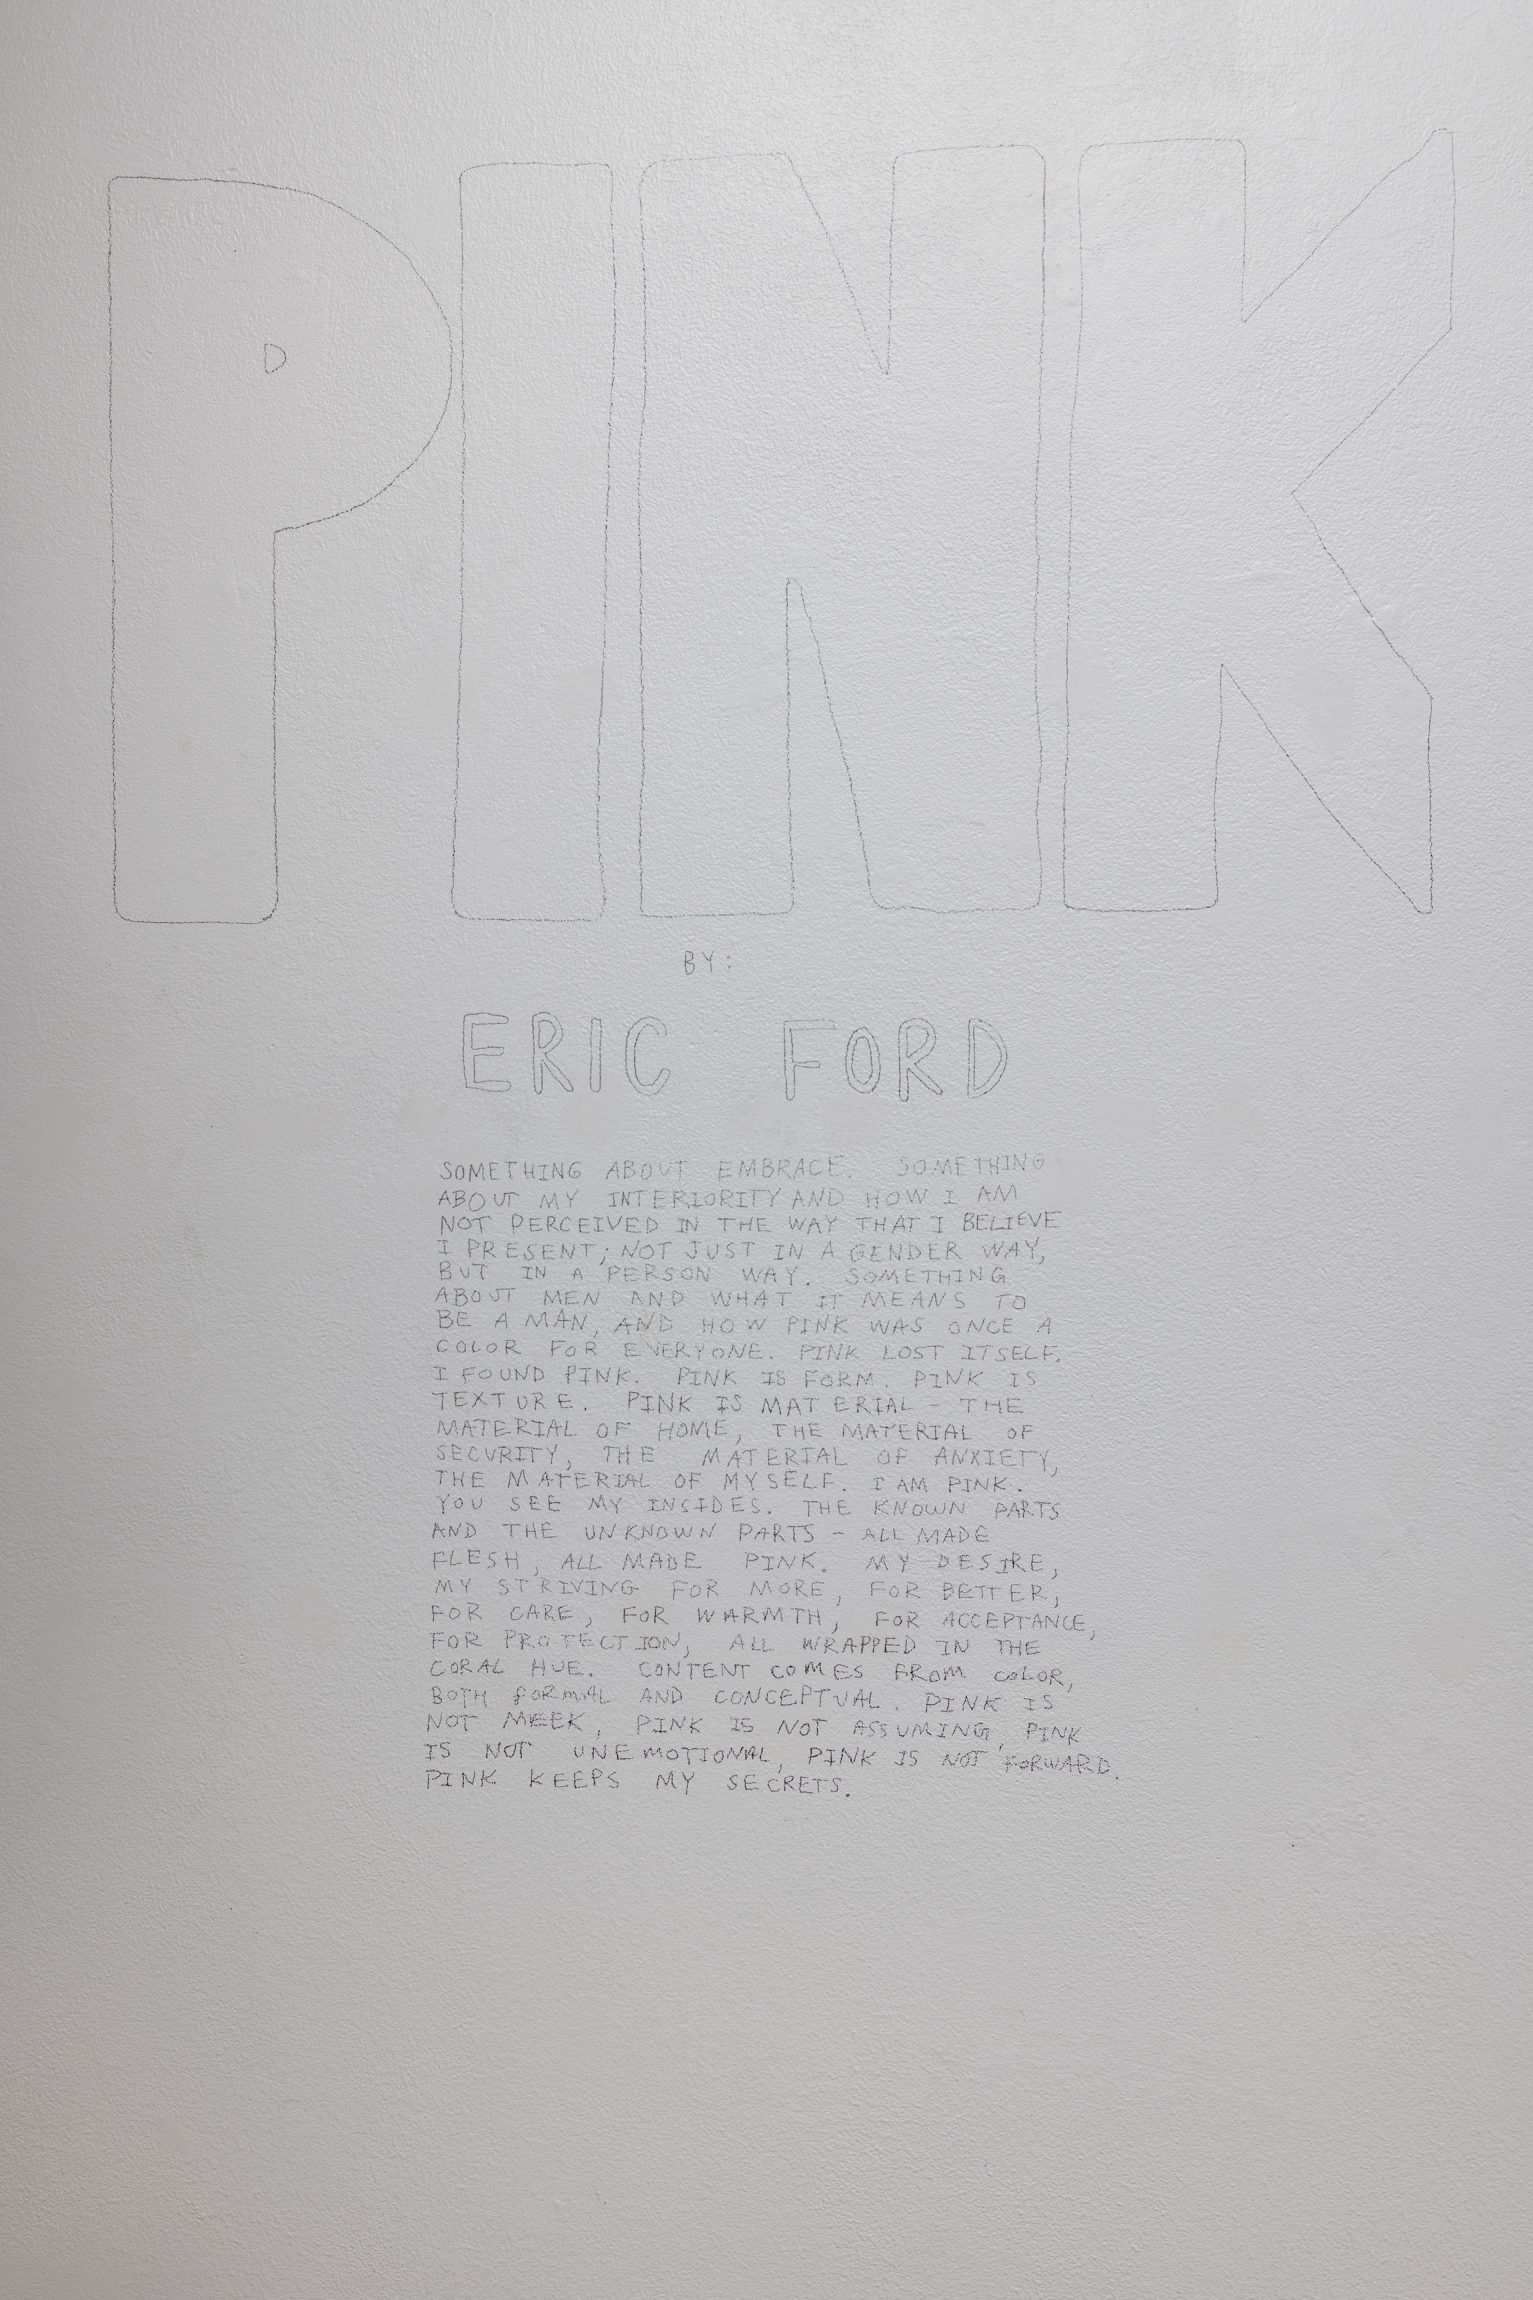 Title and description from Eric Ford's Master of Fine Arts exhibition Pink at the Gallery 7 of the Humanities Building, University of Wisconsin-Madison. Photography by Kyle Herrera.